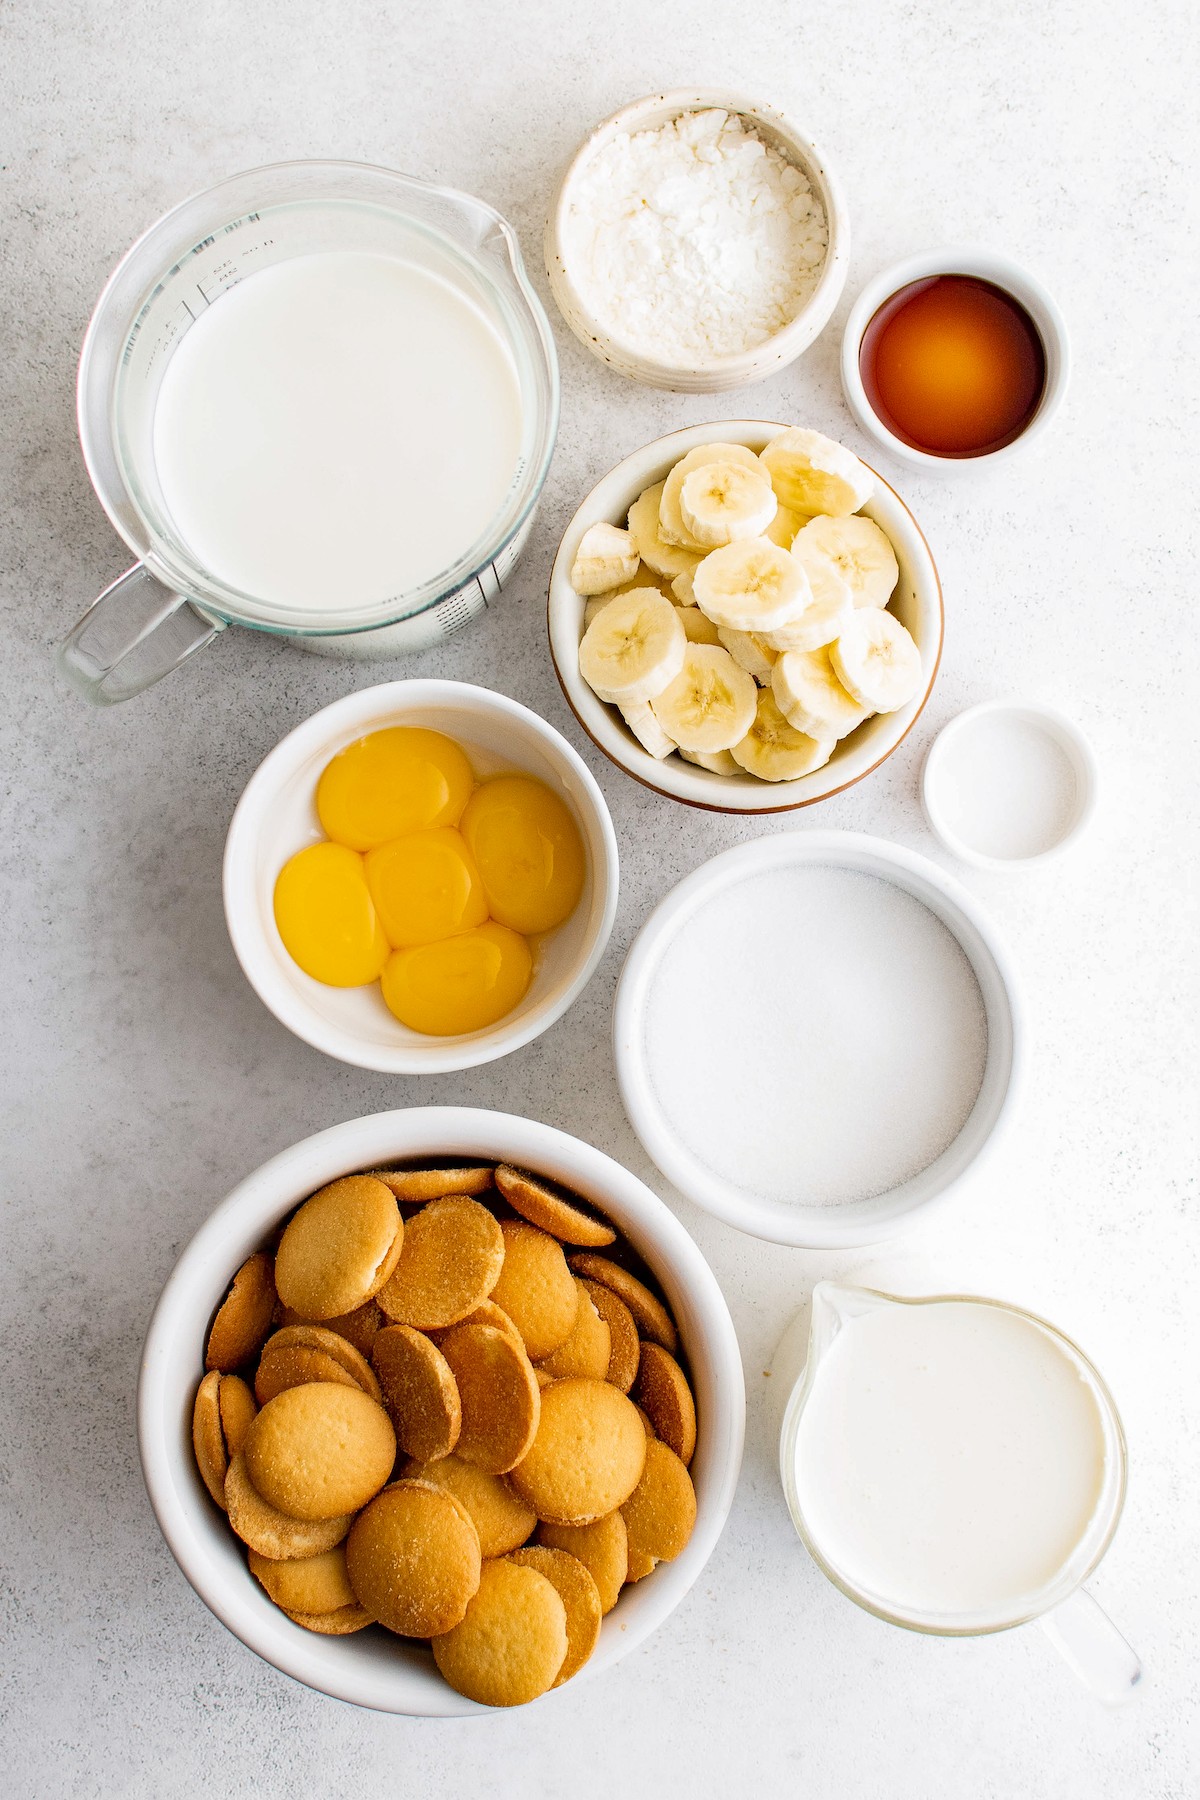 Banana pudding ingredients measured and arranged on a work surface.